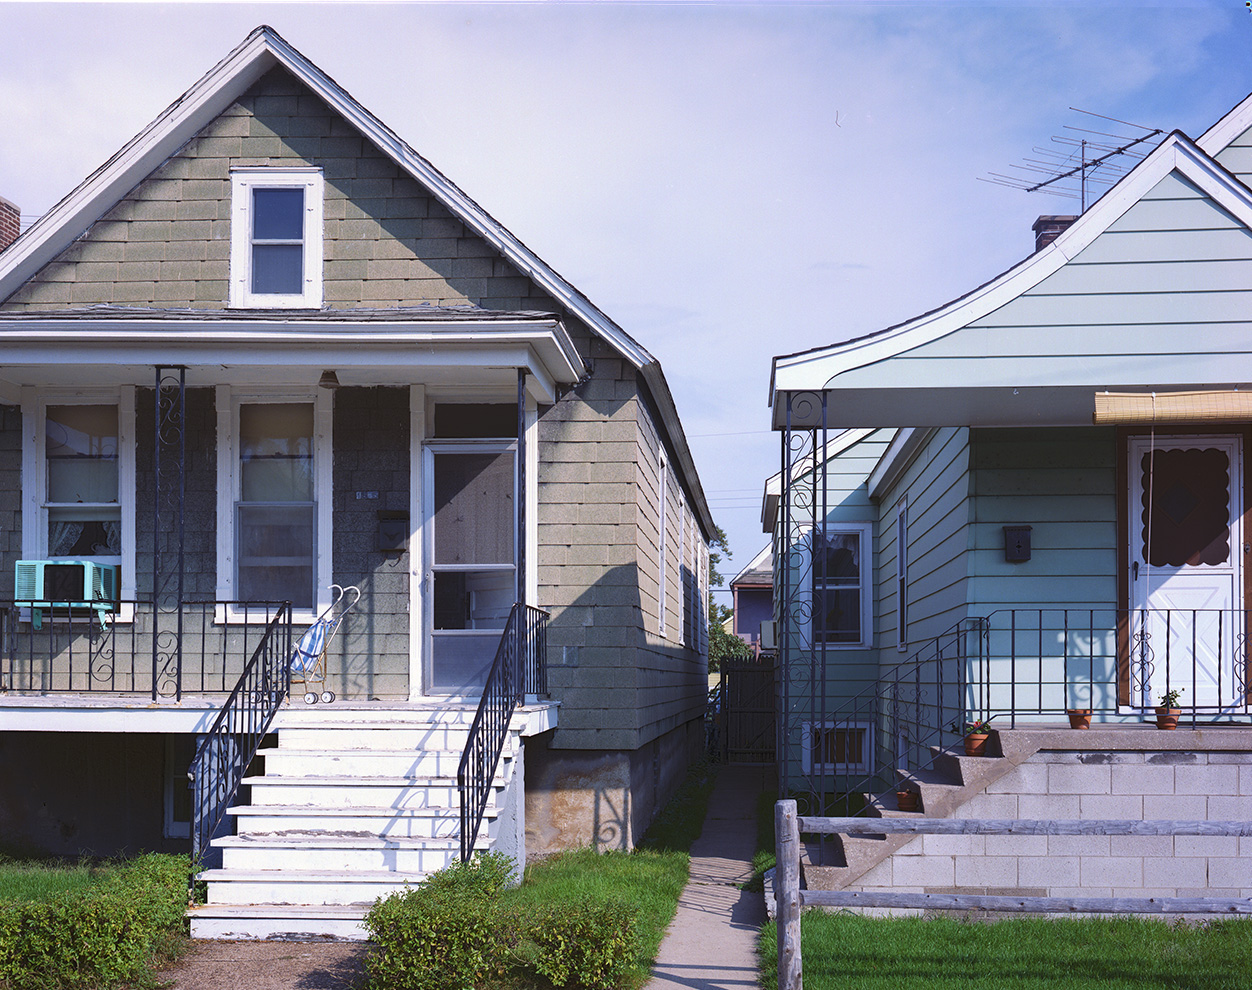 Two Houses and steps, Chicago 1987).jpg